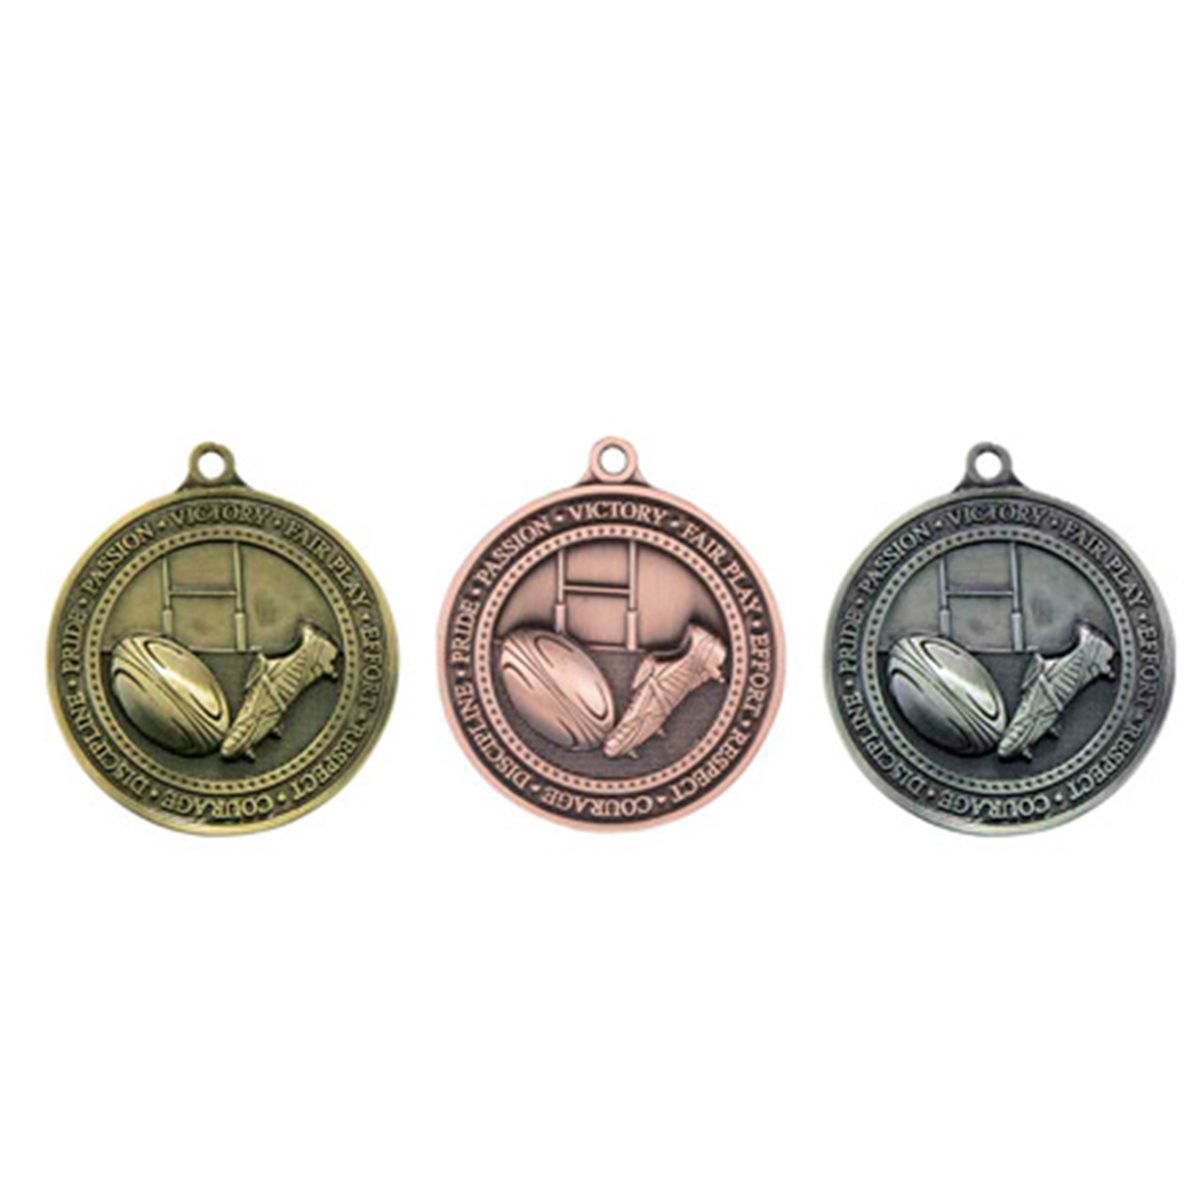 Olympia Rugby Medal 60mm, Gold, Silver, Bronze MM17085